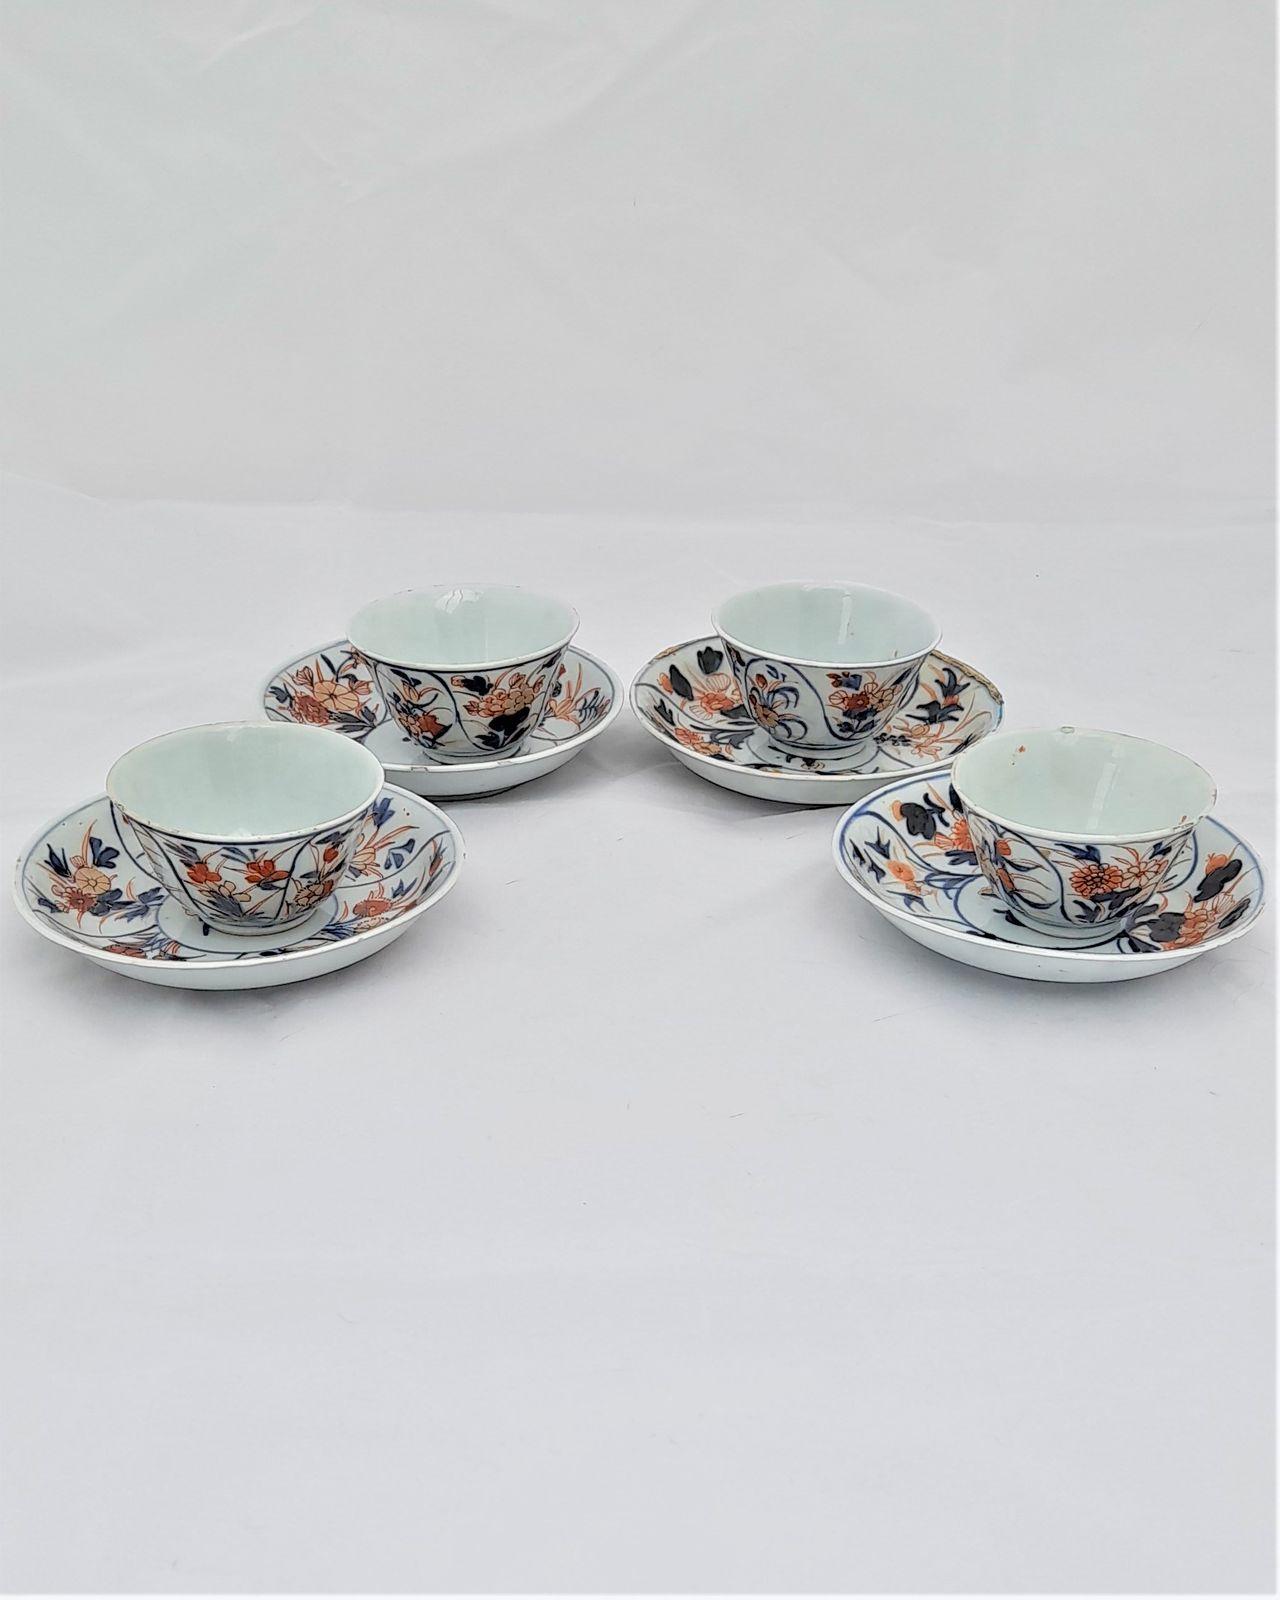 A very attractive set of four antique Japanese Arita porcelain tea bowls and saucers hand painted in an Imari pattern and dating we believe from the 18th century around 1730 during the Edo period (1603 - 1867).